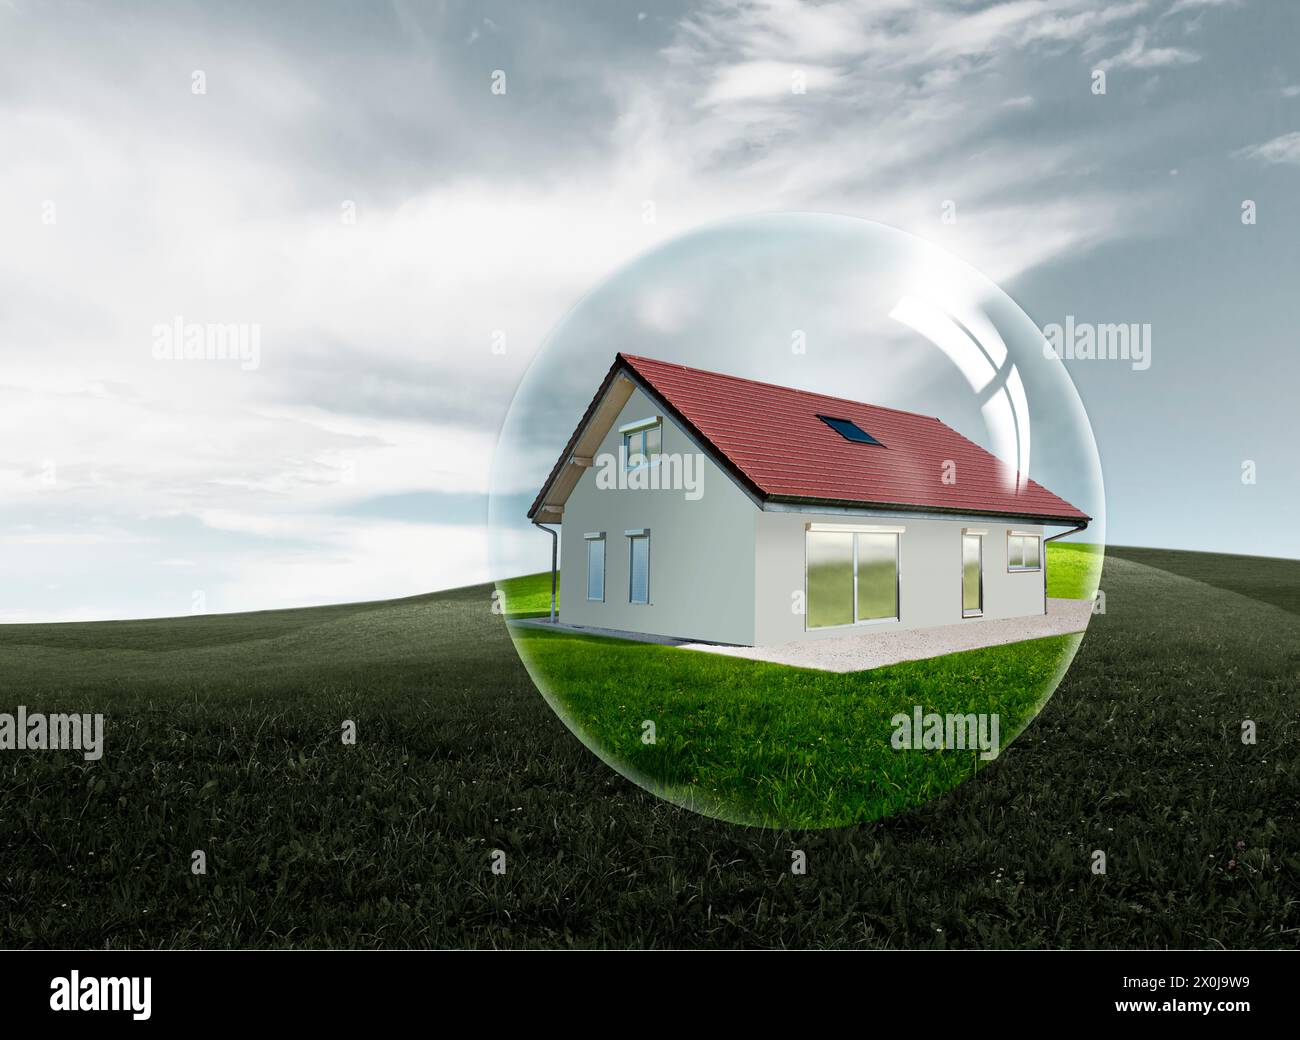 Dream of owning your own home in a bubble Stock Photo